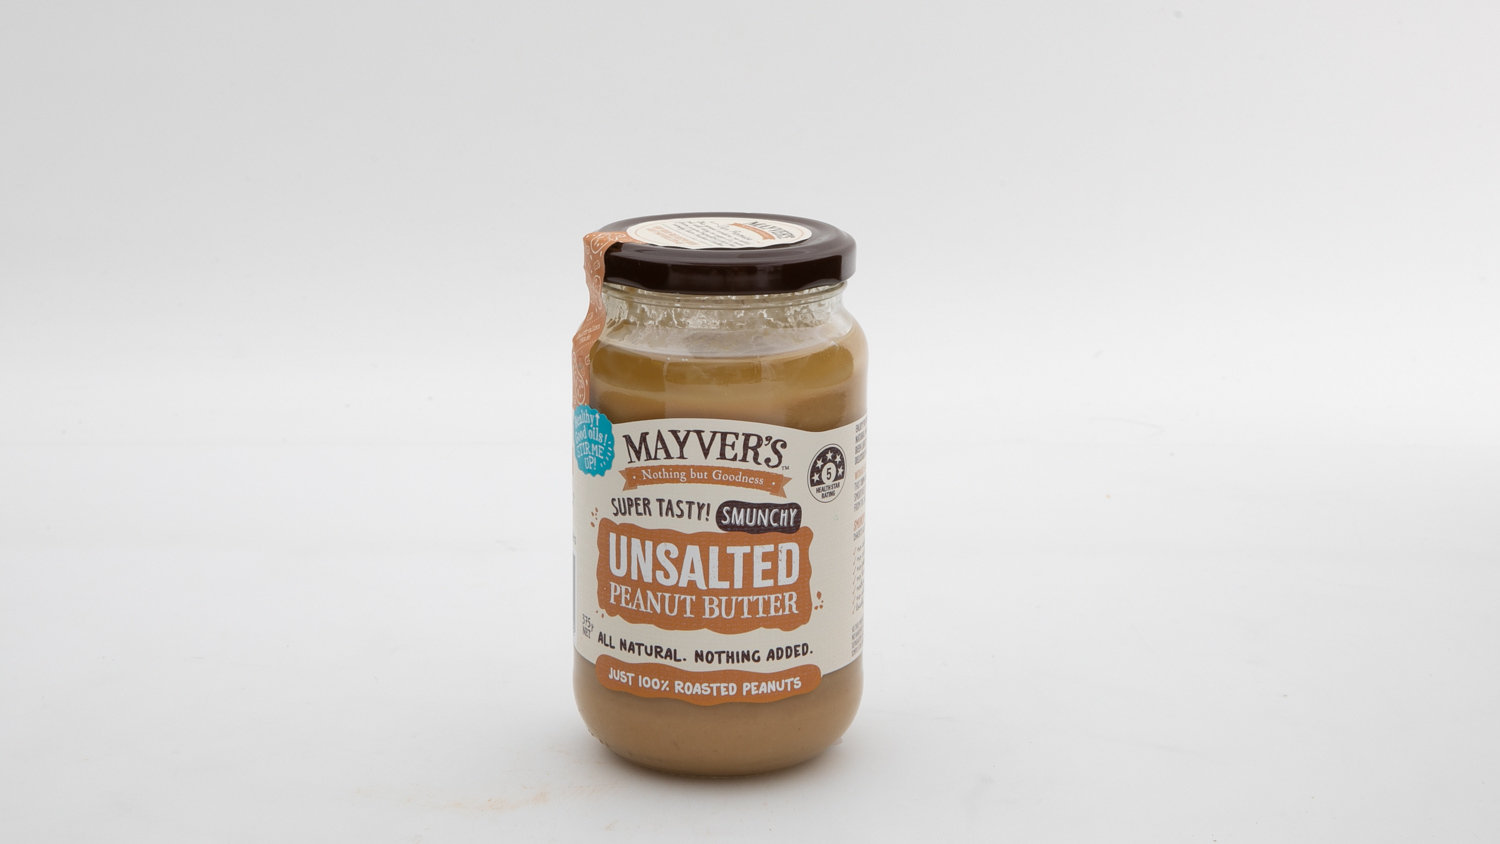 Mayver's Smunchy Peanut Butter Unsalted carousel image